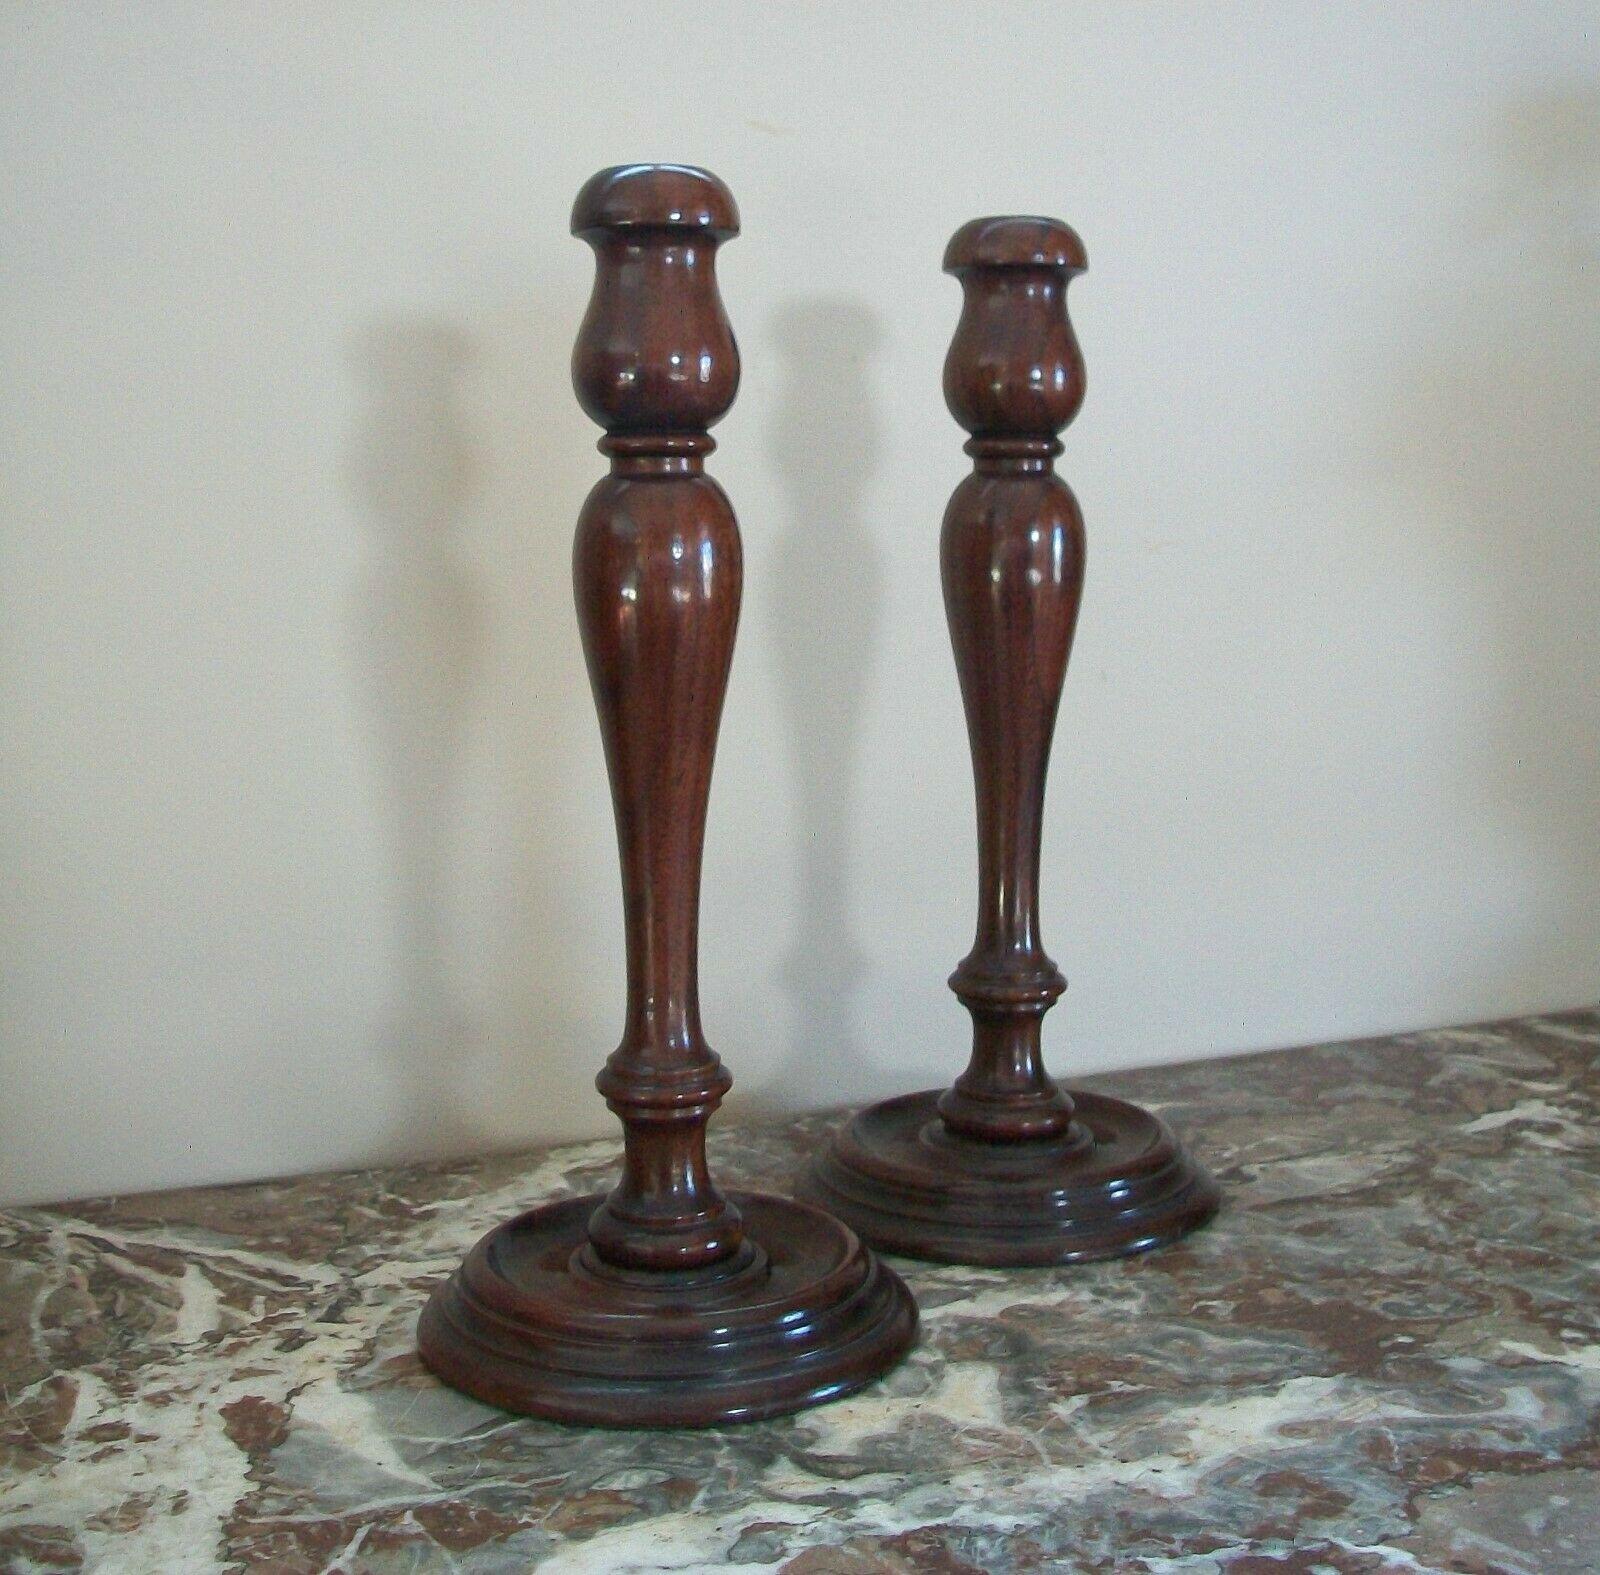 Antique large pair of hardwood candlesticks - lathe turned - rich patina - original wool felt liners to the bases - unsigned - United States - circa 1900.

Excellent antique condition - minor scuffs - no loss - no damage - no restoration - old glue